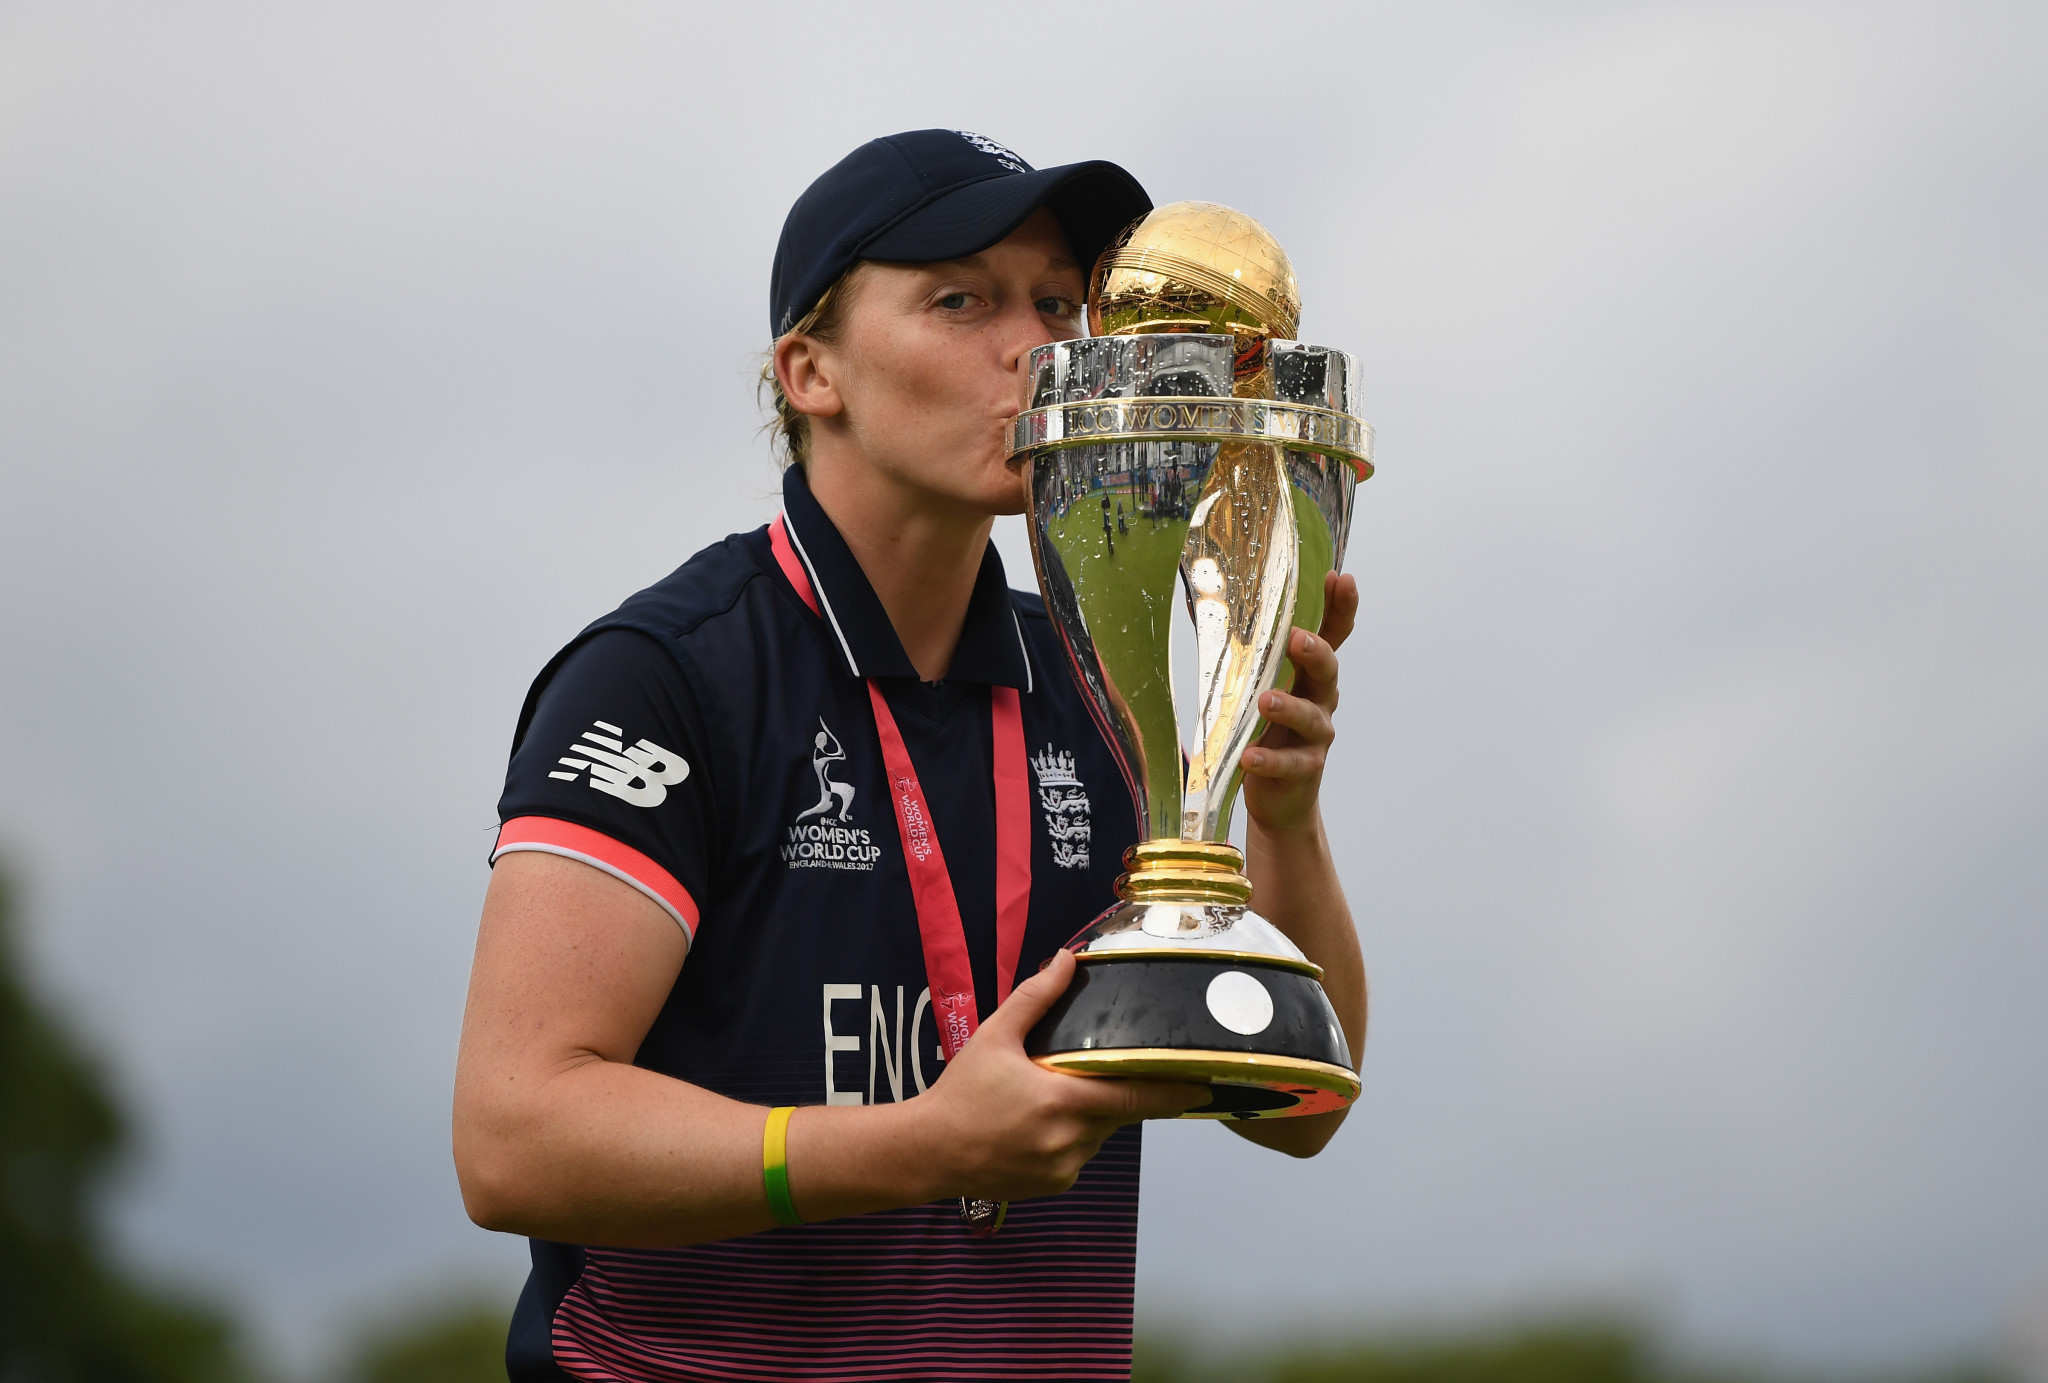 ICC announce women's ODI and T20 teams of the year